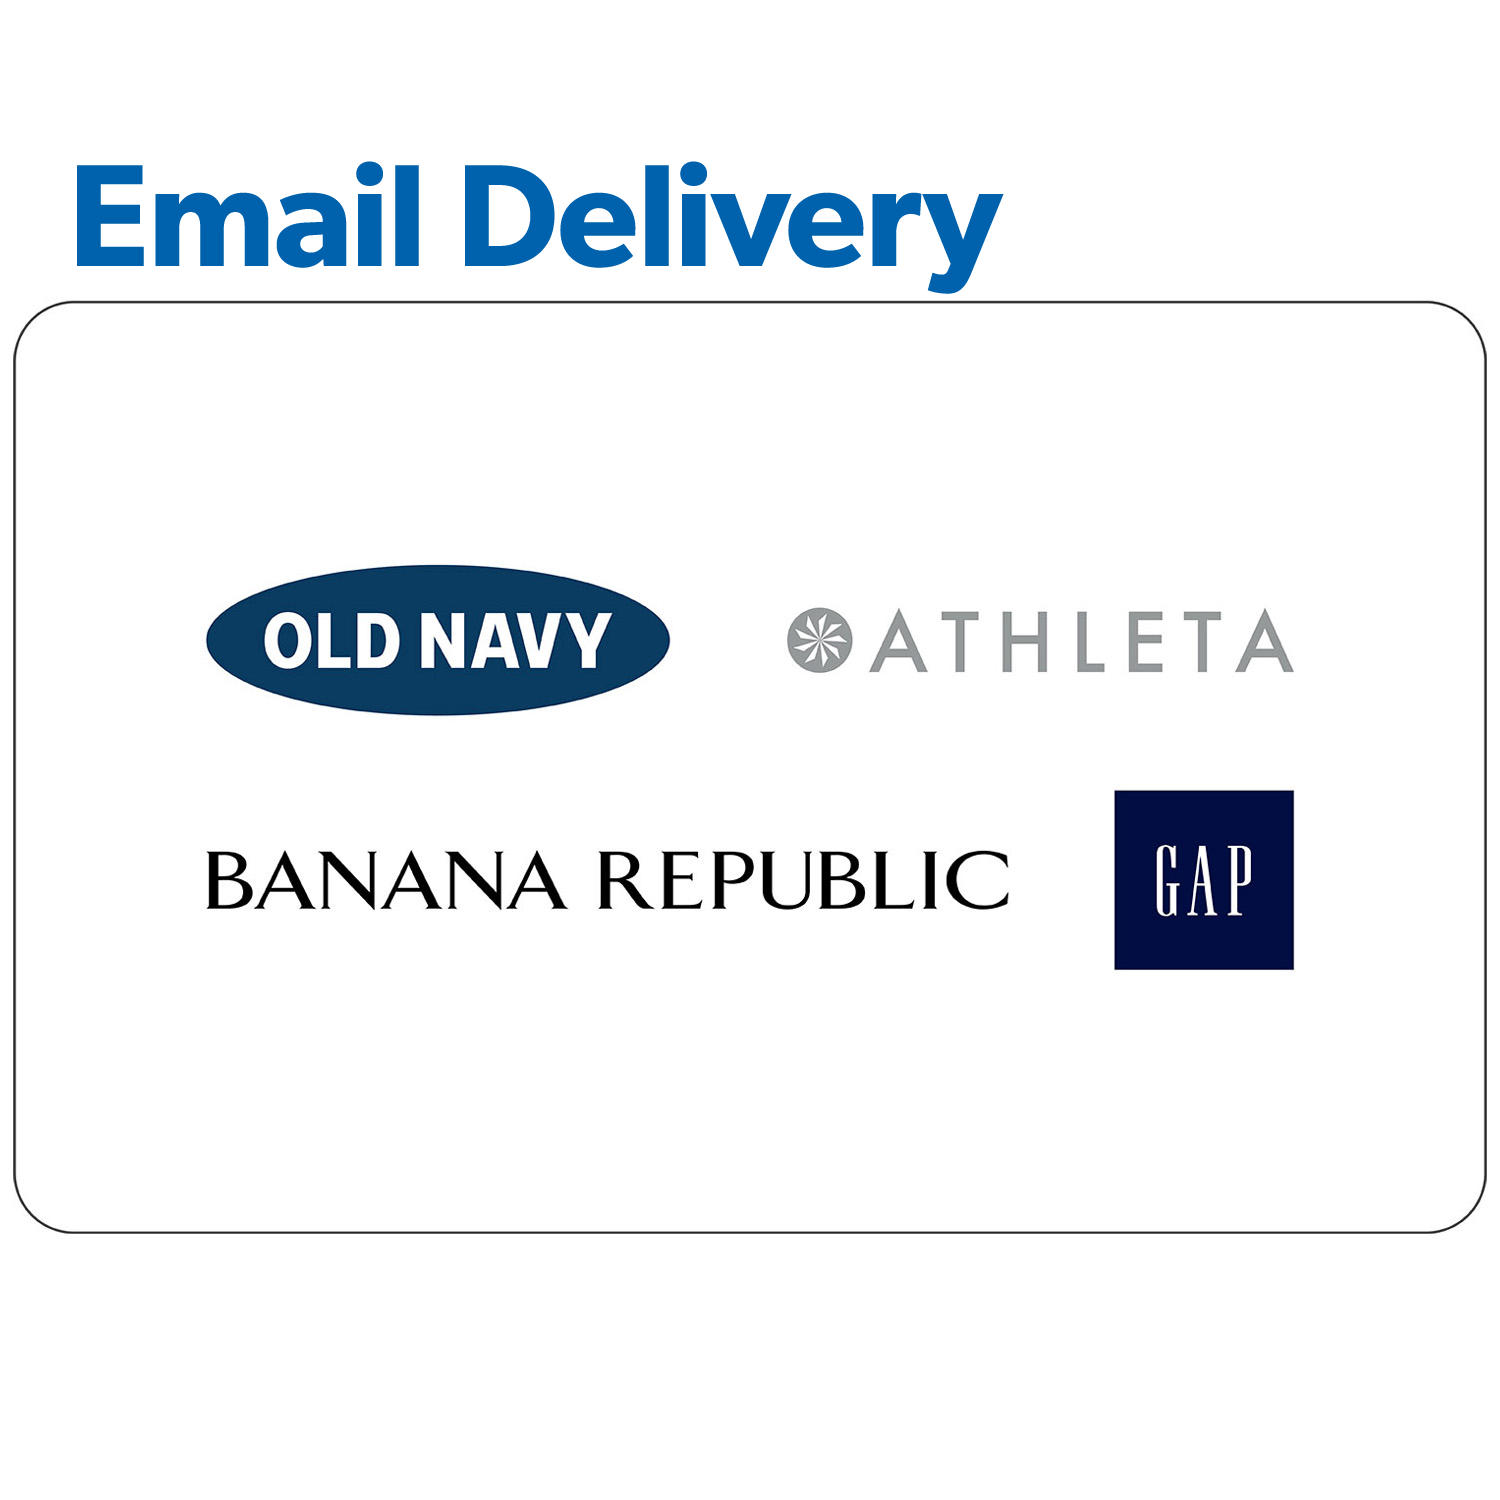 GAP Options (GAP, Old Navy, Banana Republic and, Athleta) $50 Email Delivery Gift Card